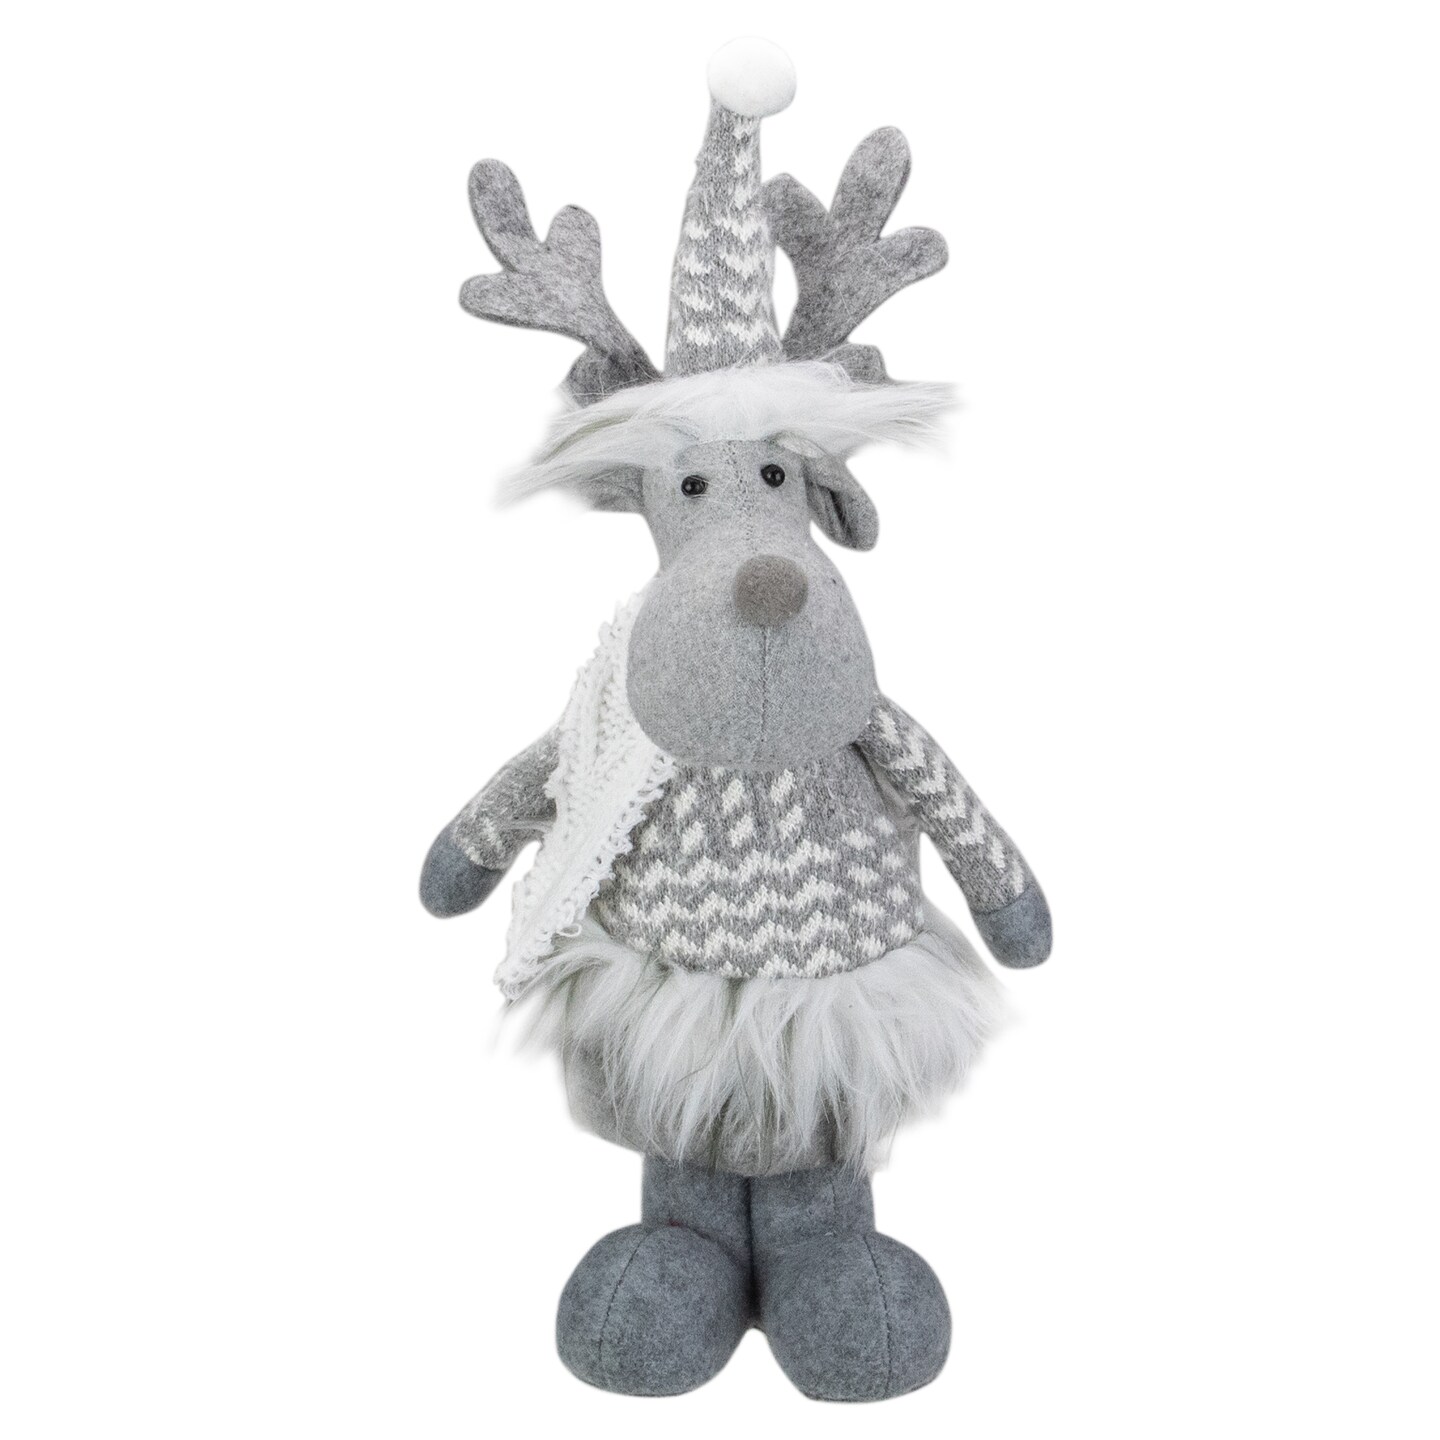 Northlight 12-Inch Gray and White Standing Tabletop Moose Christmas Figure